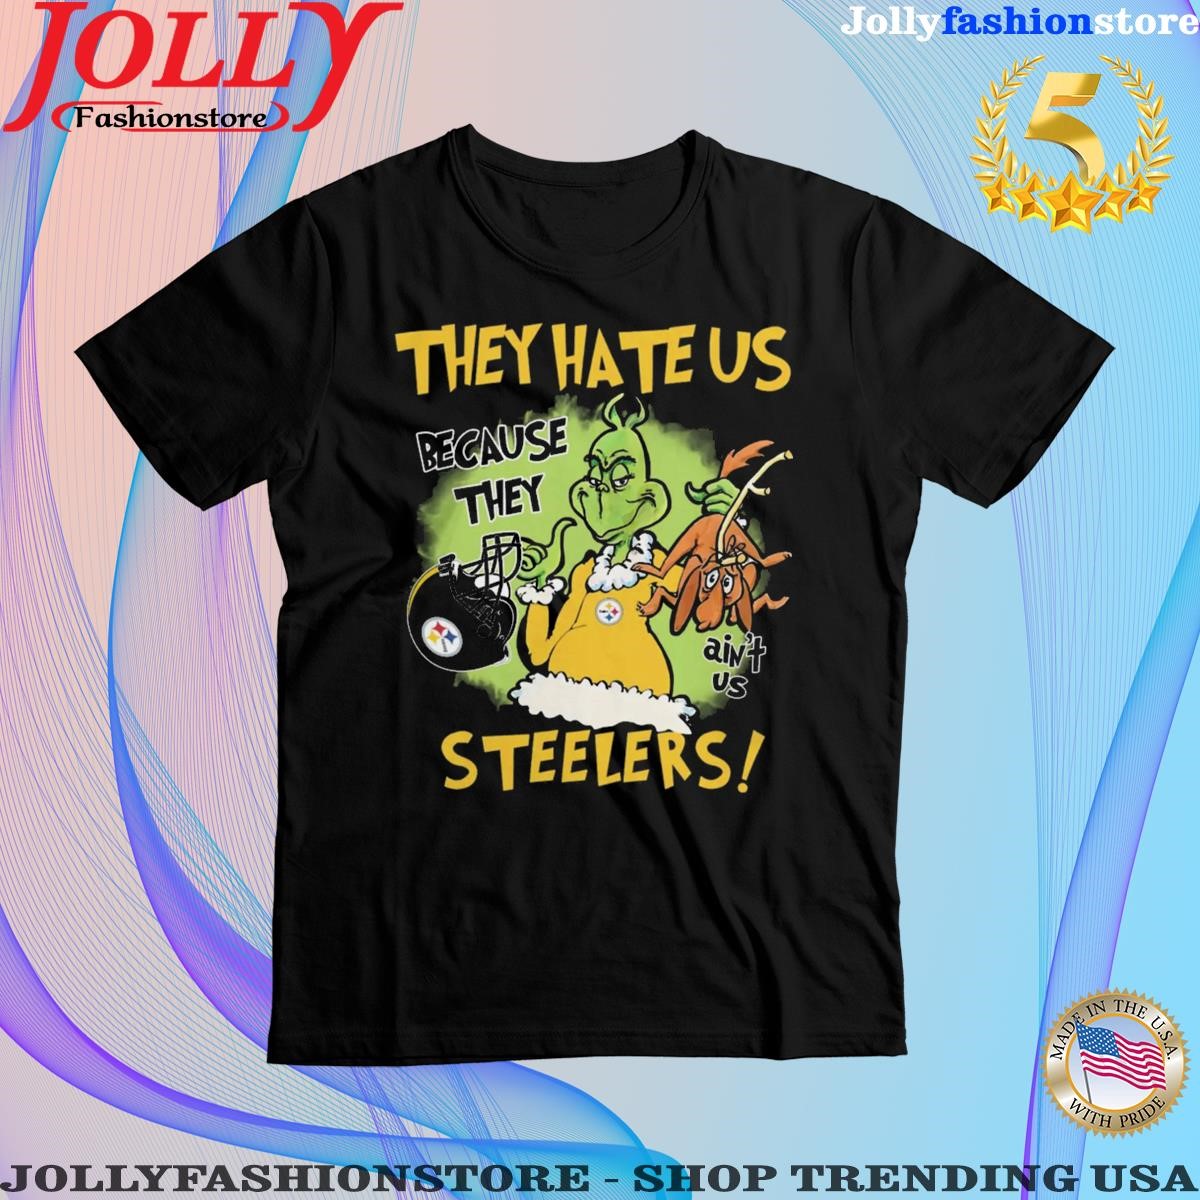 The Grinch They Hate Us Because Ain't Us Steelers Shirt